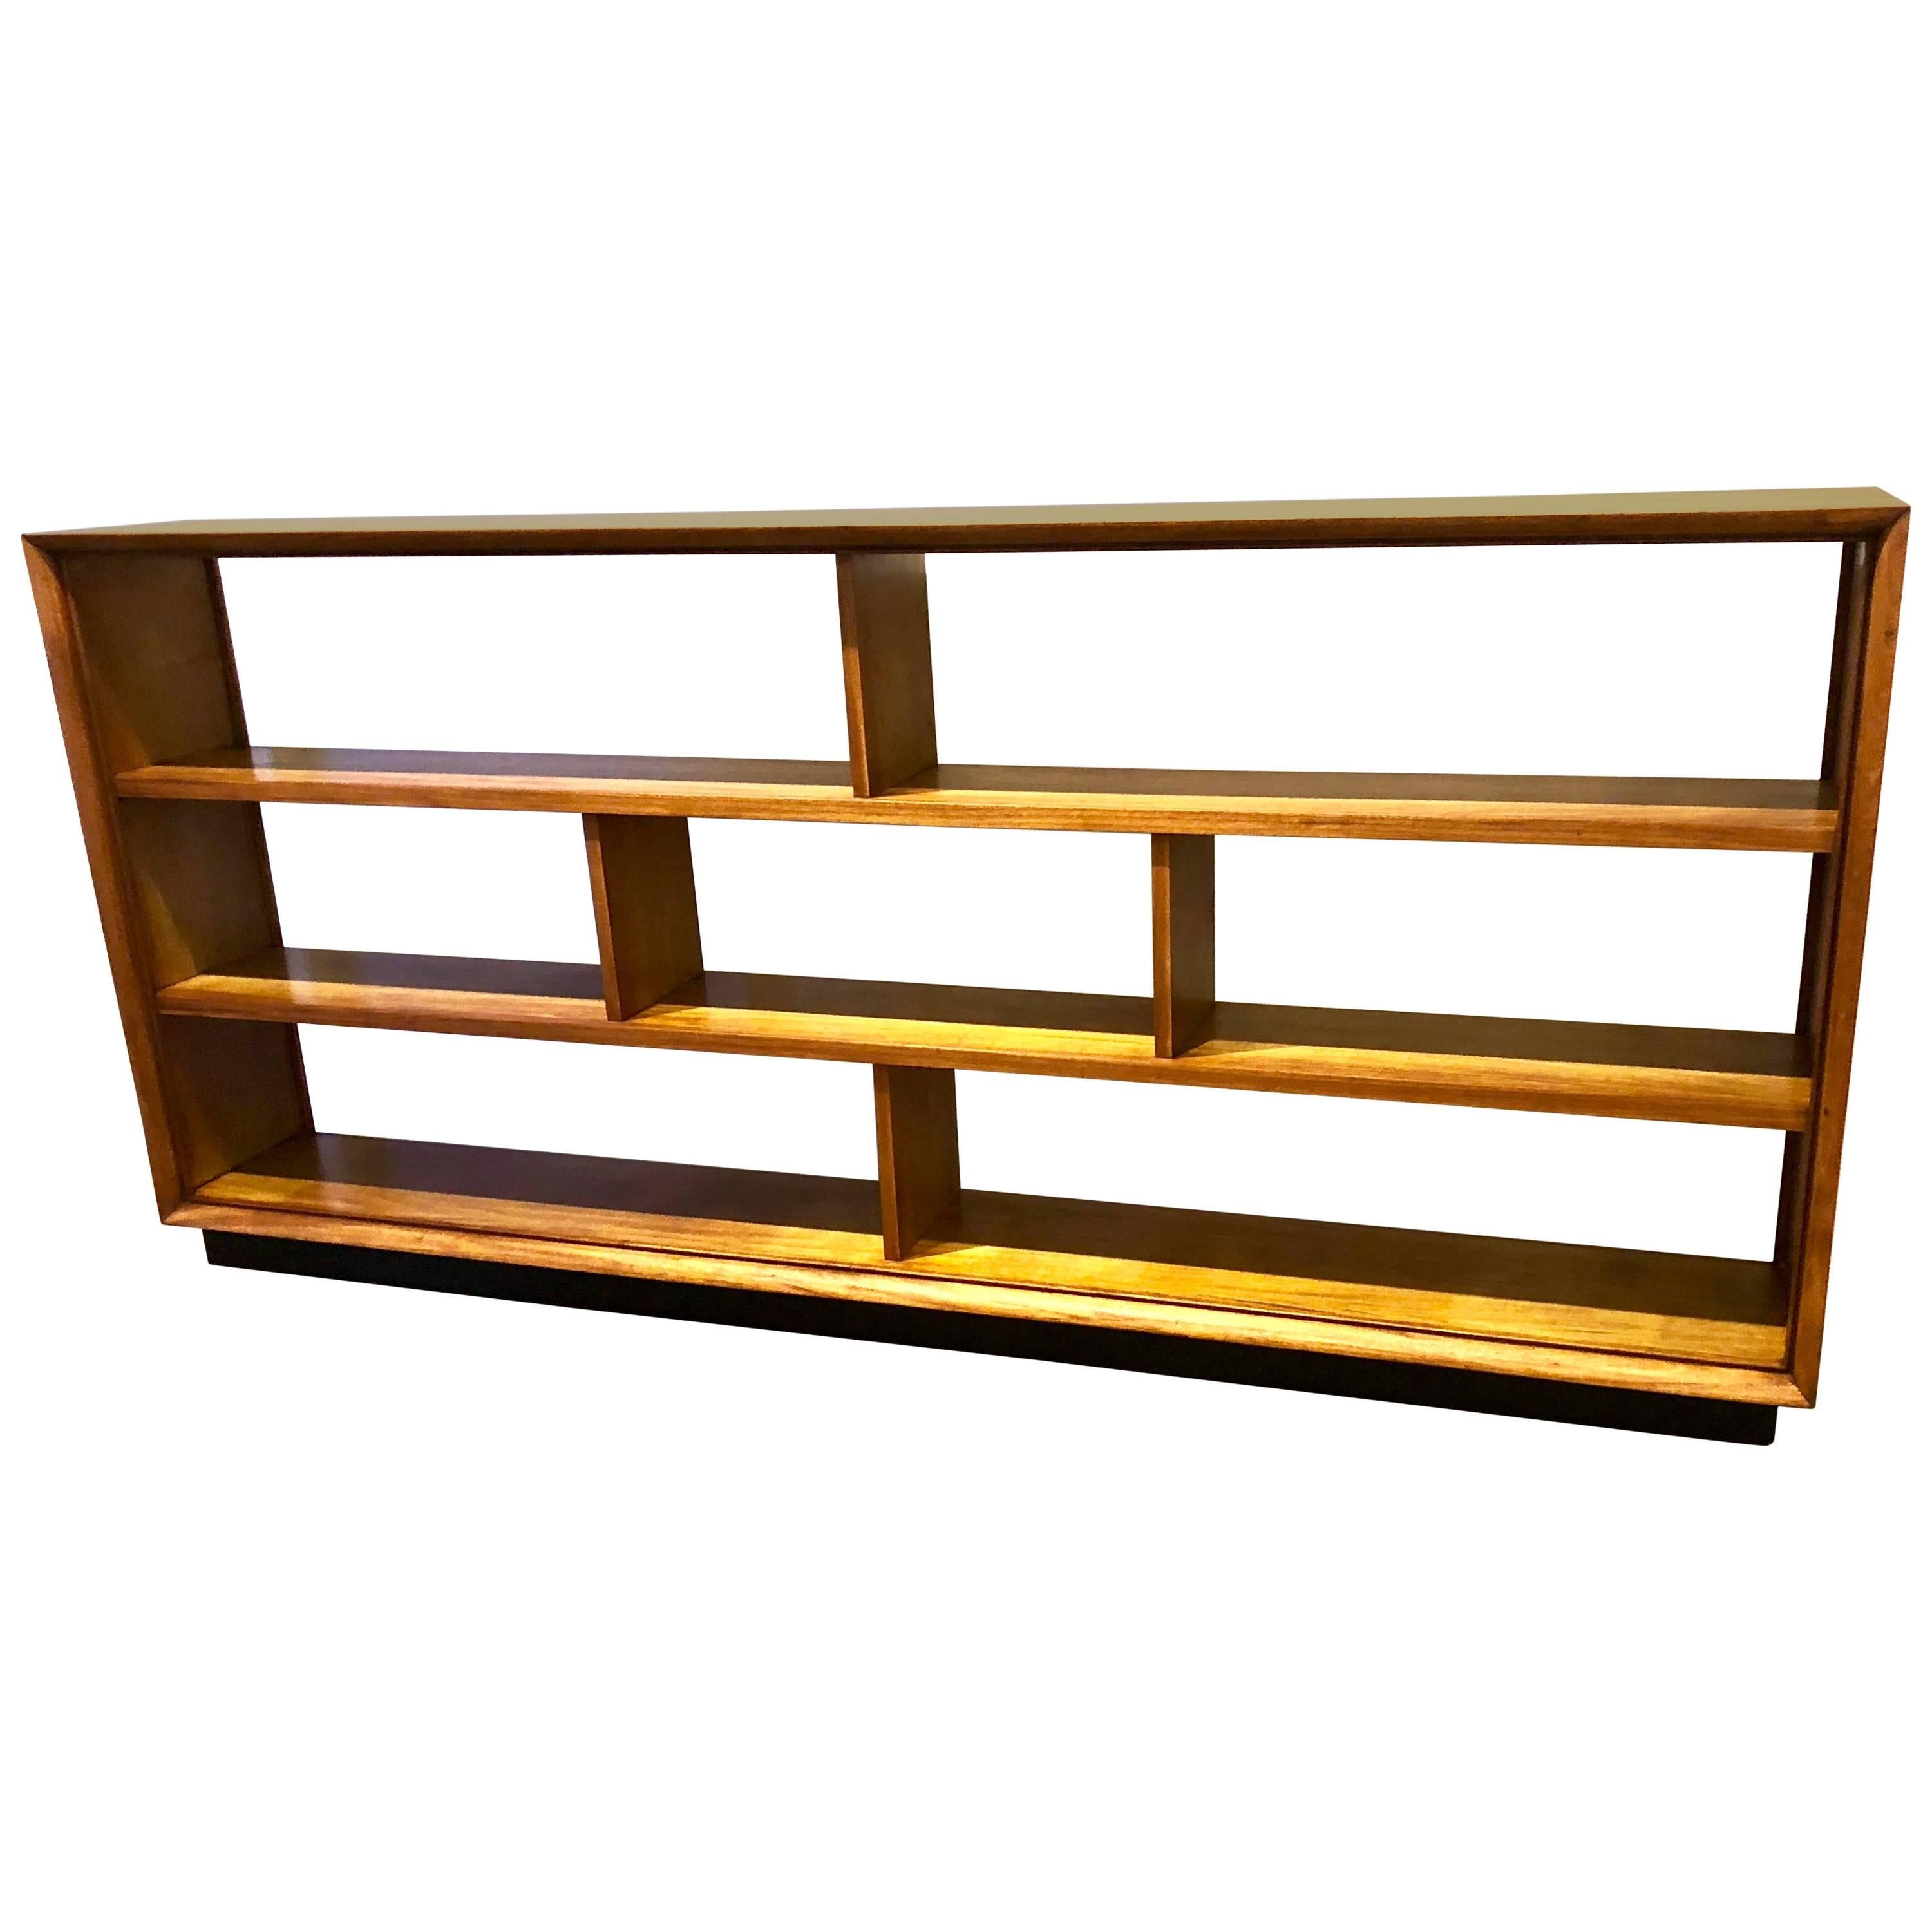 Striking ‘X’ Long and Low Mid-Century Modern American Mahogany Bookcase